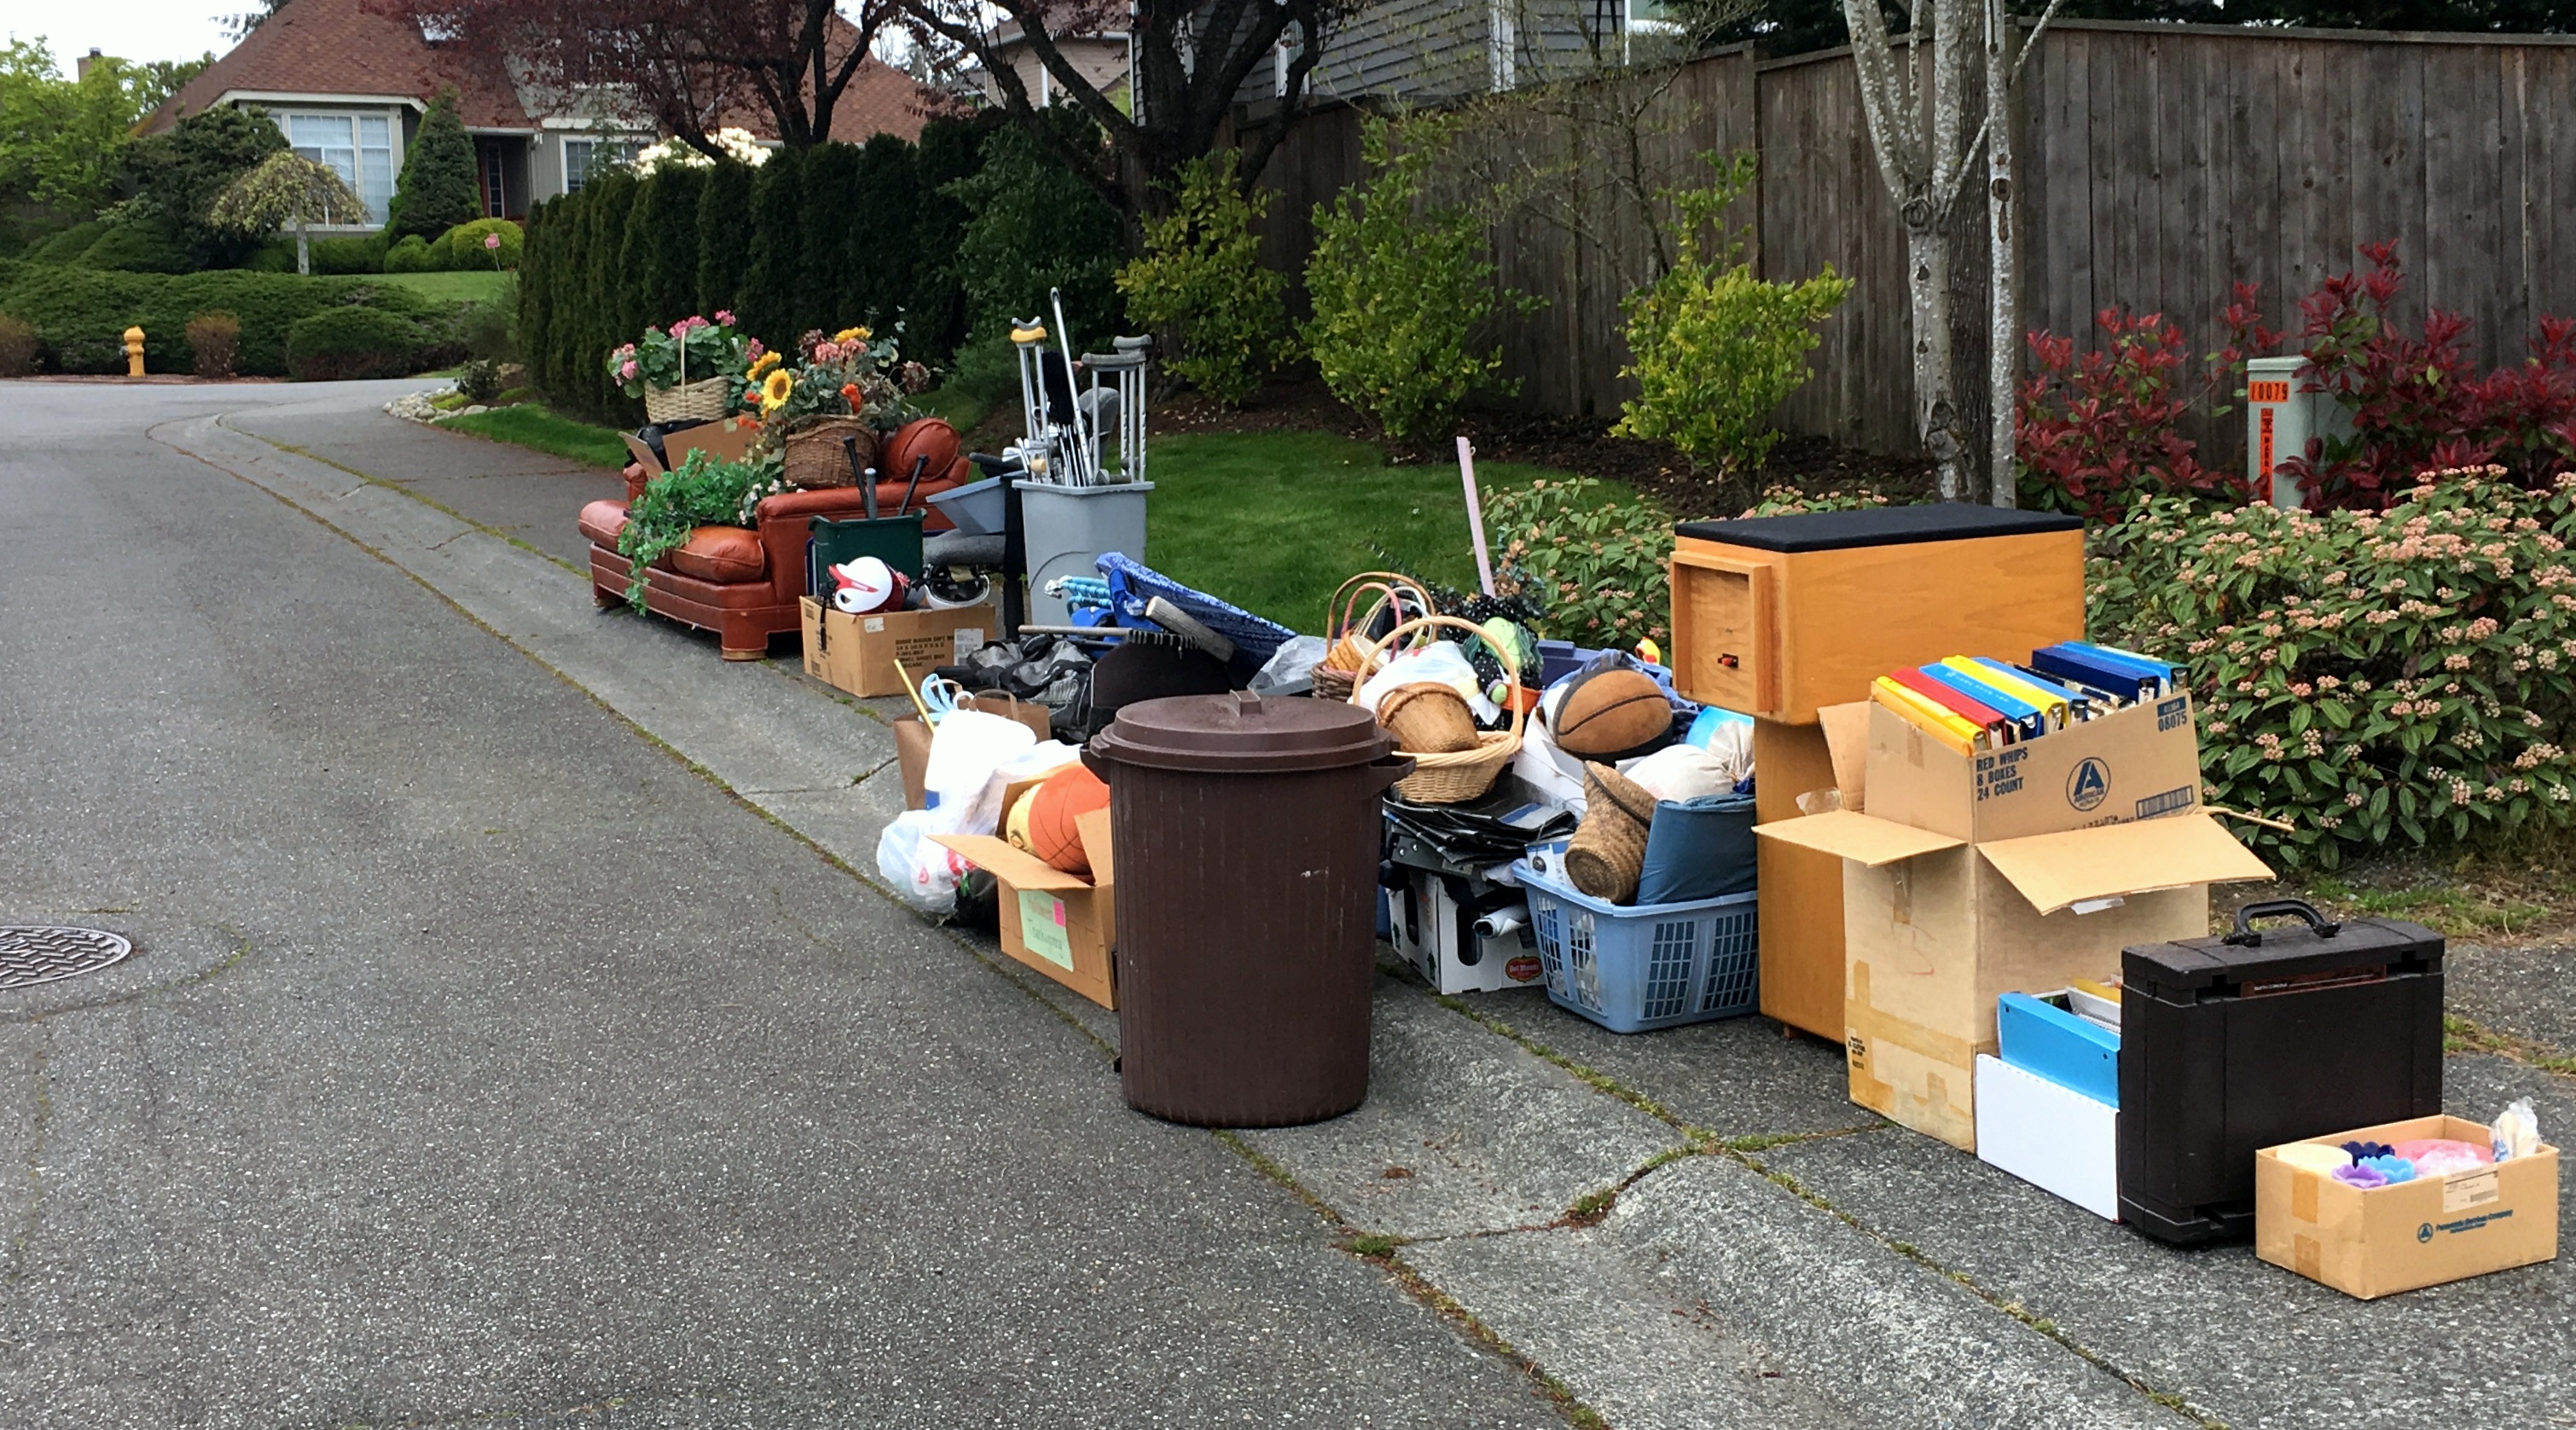 boxes, garbage, chairs and trash ready at curb to be picked up by garbage truck